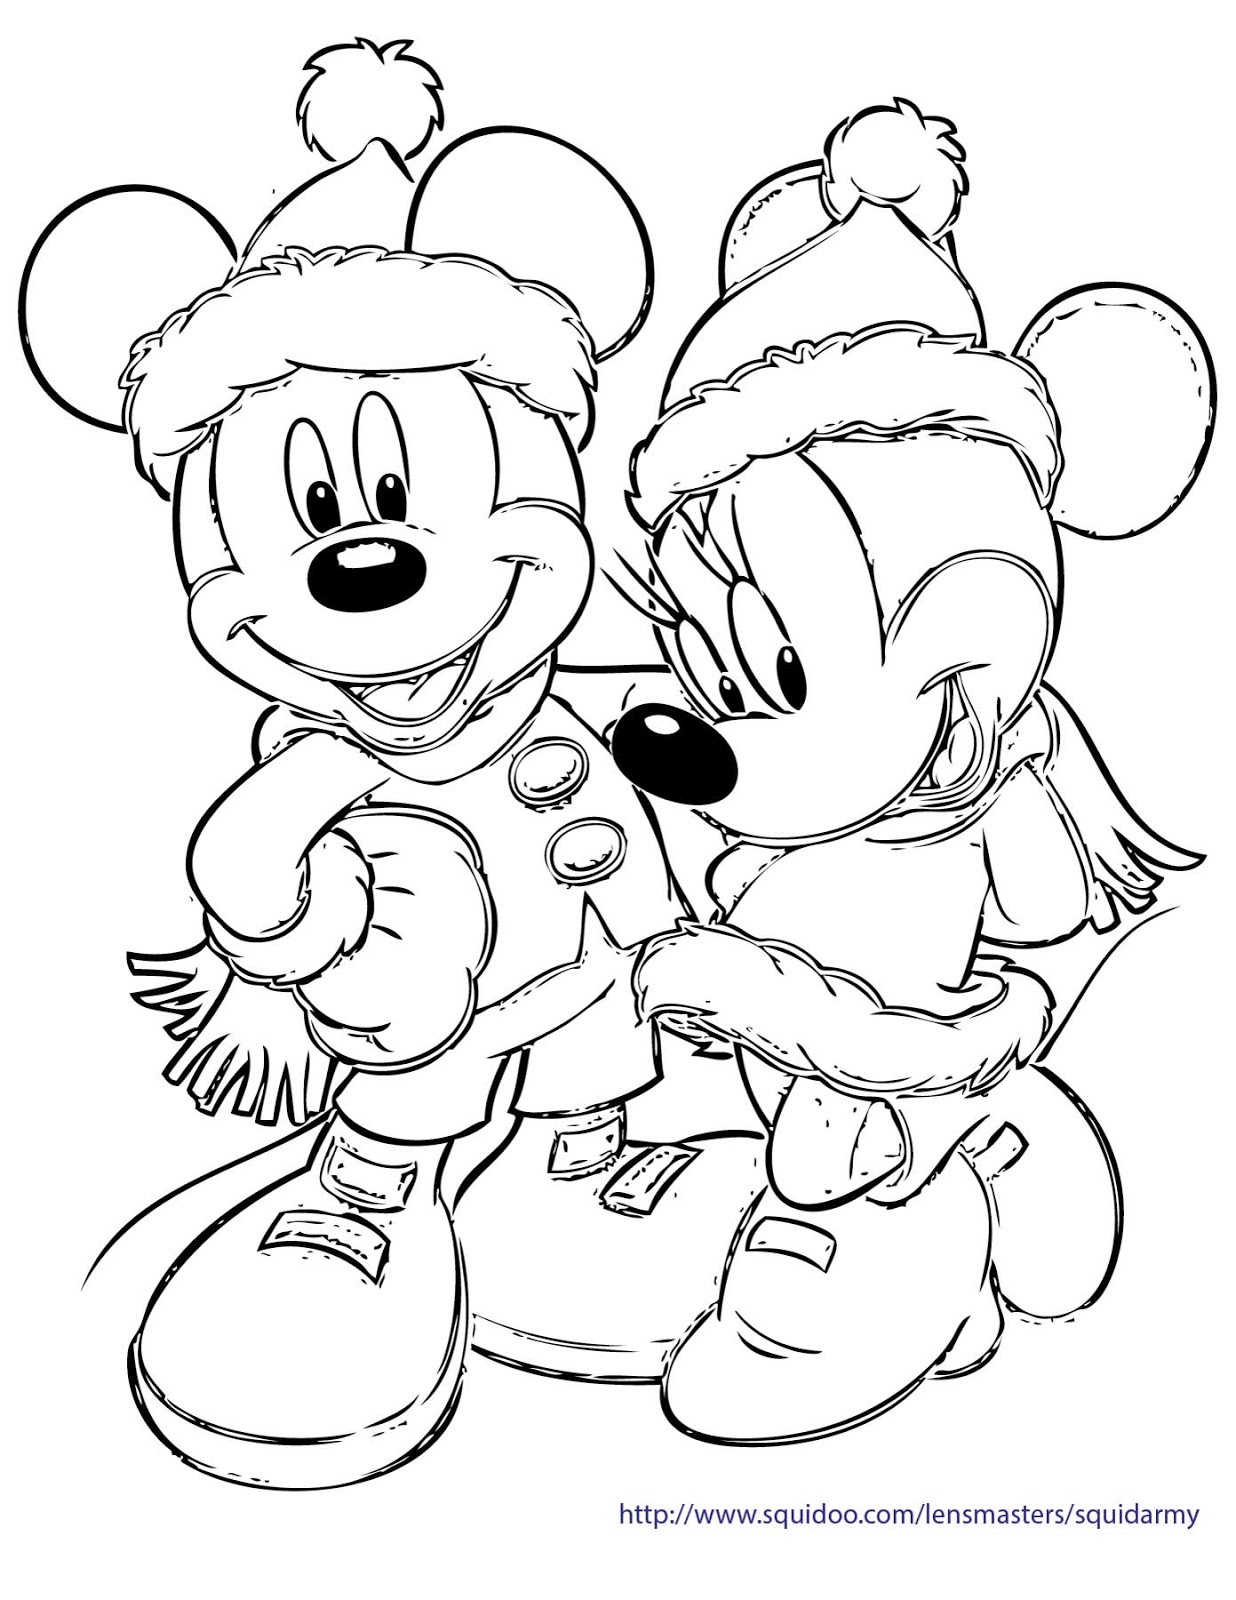 Mickey Mouse Christmas Coloring Pages Free Print at GetColorings.com